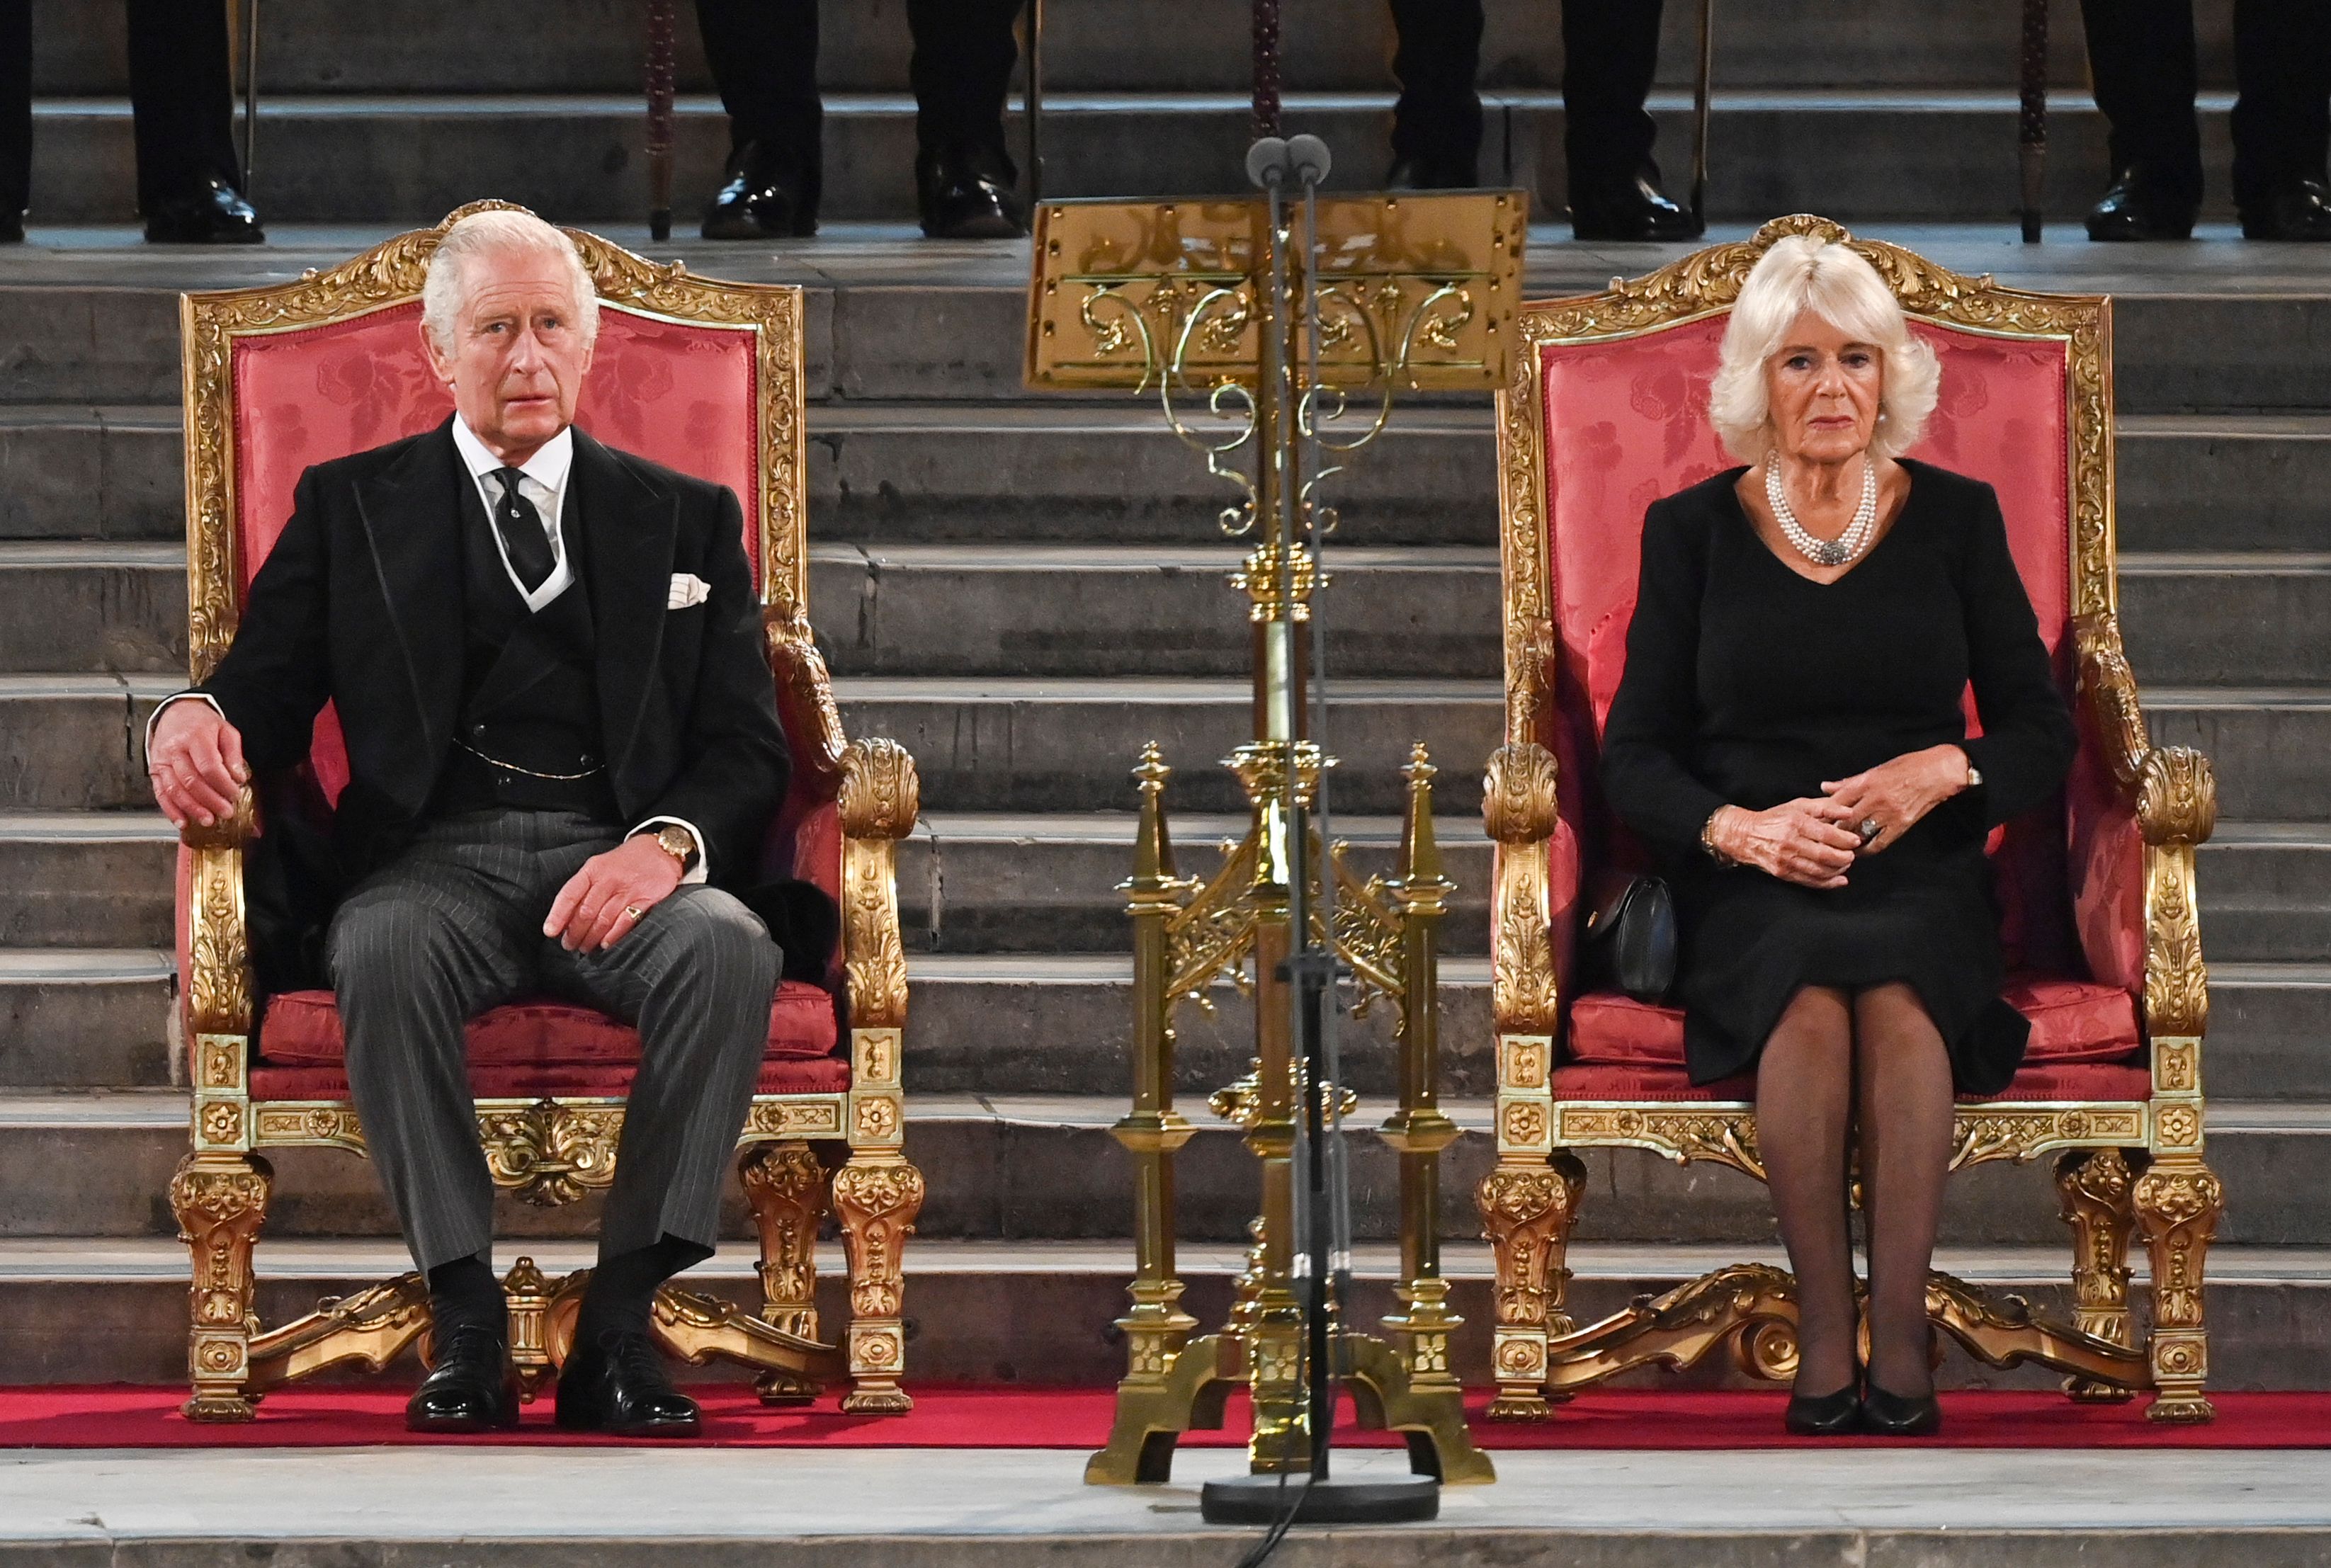 <p>His Majesty King Charles III and Her Majesty Camilla, The Queen Consort sat in red and gold thrones as the new sovereign received condolences over his mother Queen Elizabeth II's <a href="https://www.wonderwall.com/celebrity/celebrities-dignitaries-react-to-death-of-queen-elizabeth-ii-647756.gallery">death</a> from both Houses of Parliament at Westminster Hall in London on Sept. 12, 2022.</p>